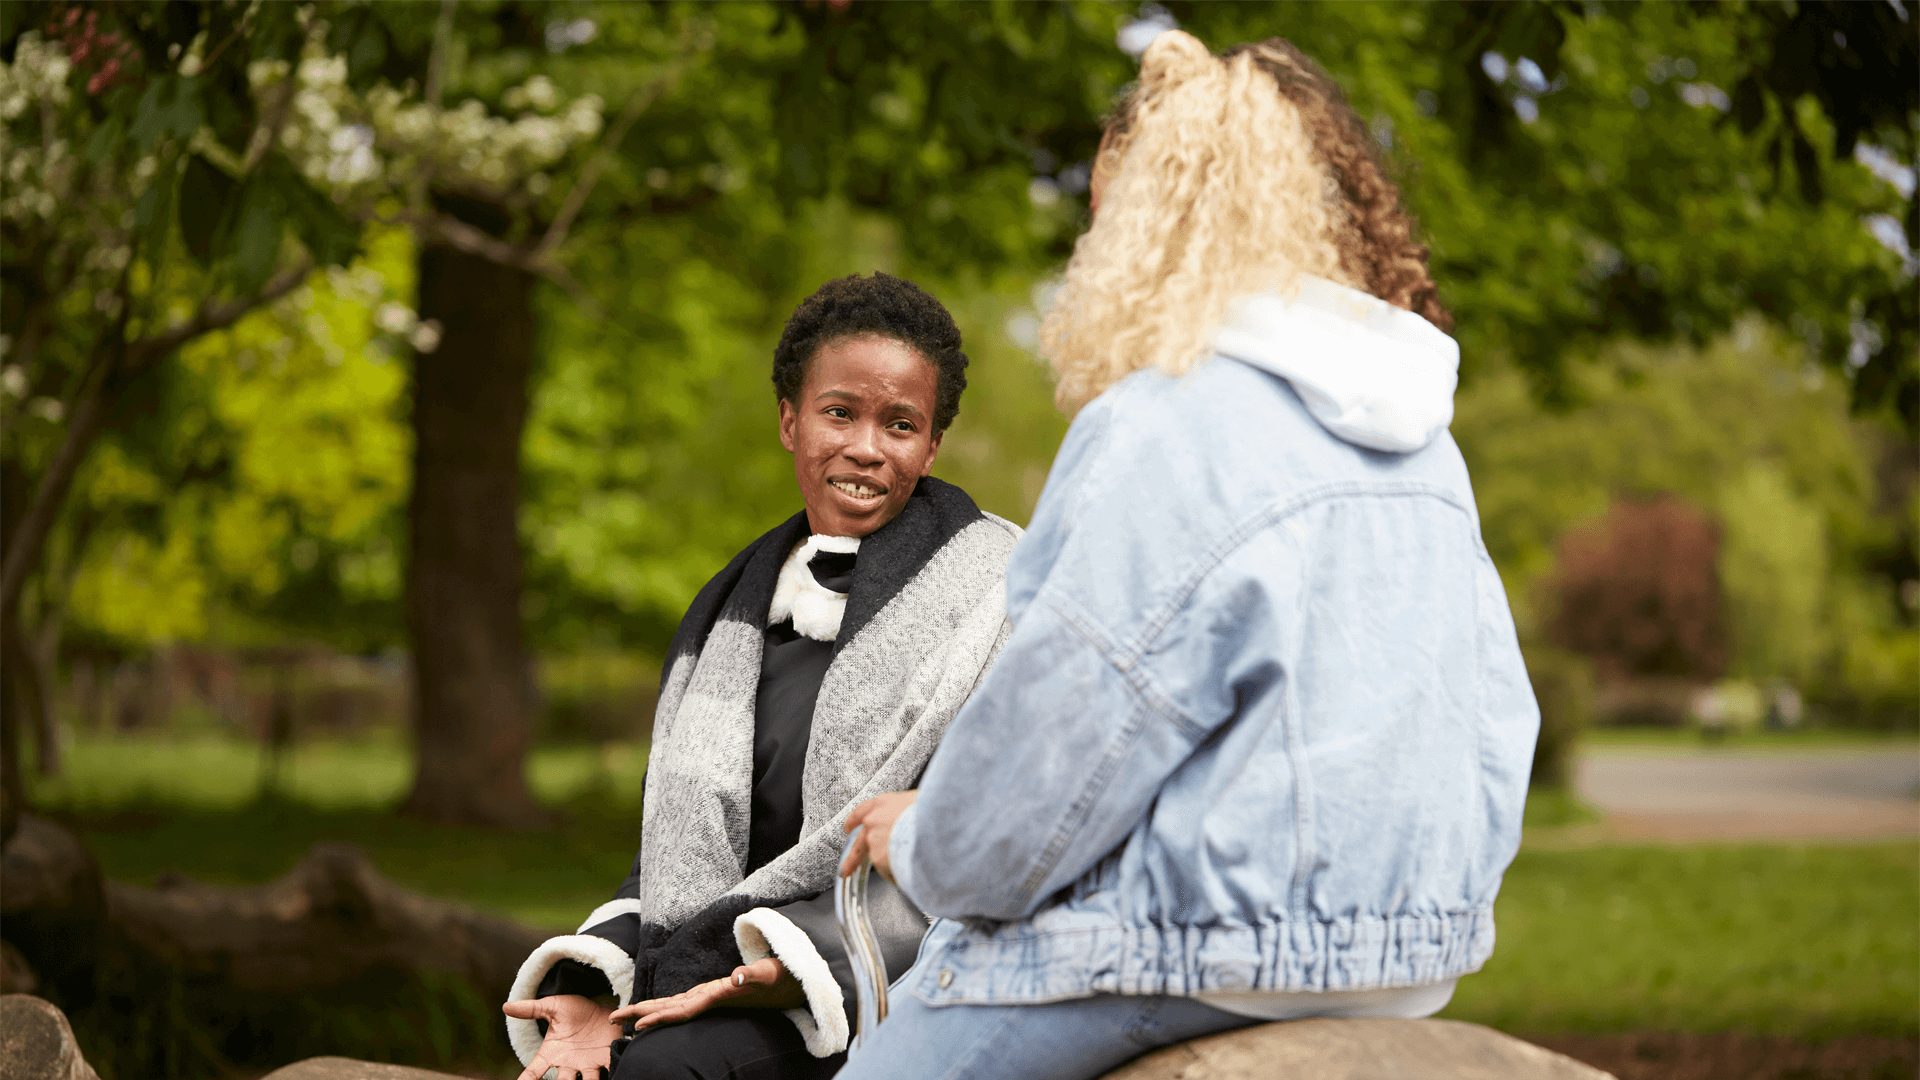 a-girl-with-short-curly-hair-wearing-black-jacket-talking-to-another-young-woman-with-long-curly-hair-wearing-denim-jacket-while-they-are-sitting-on-bench-in-the-park